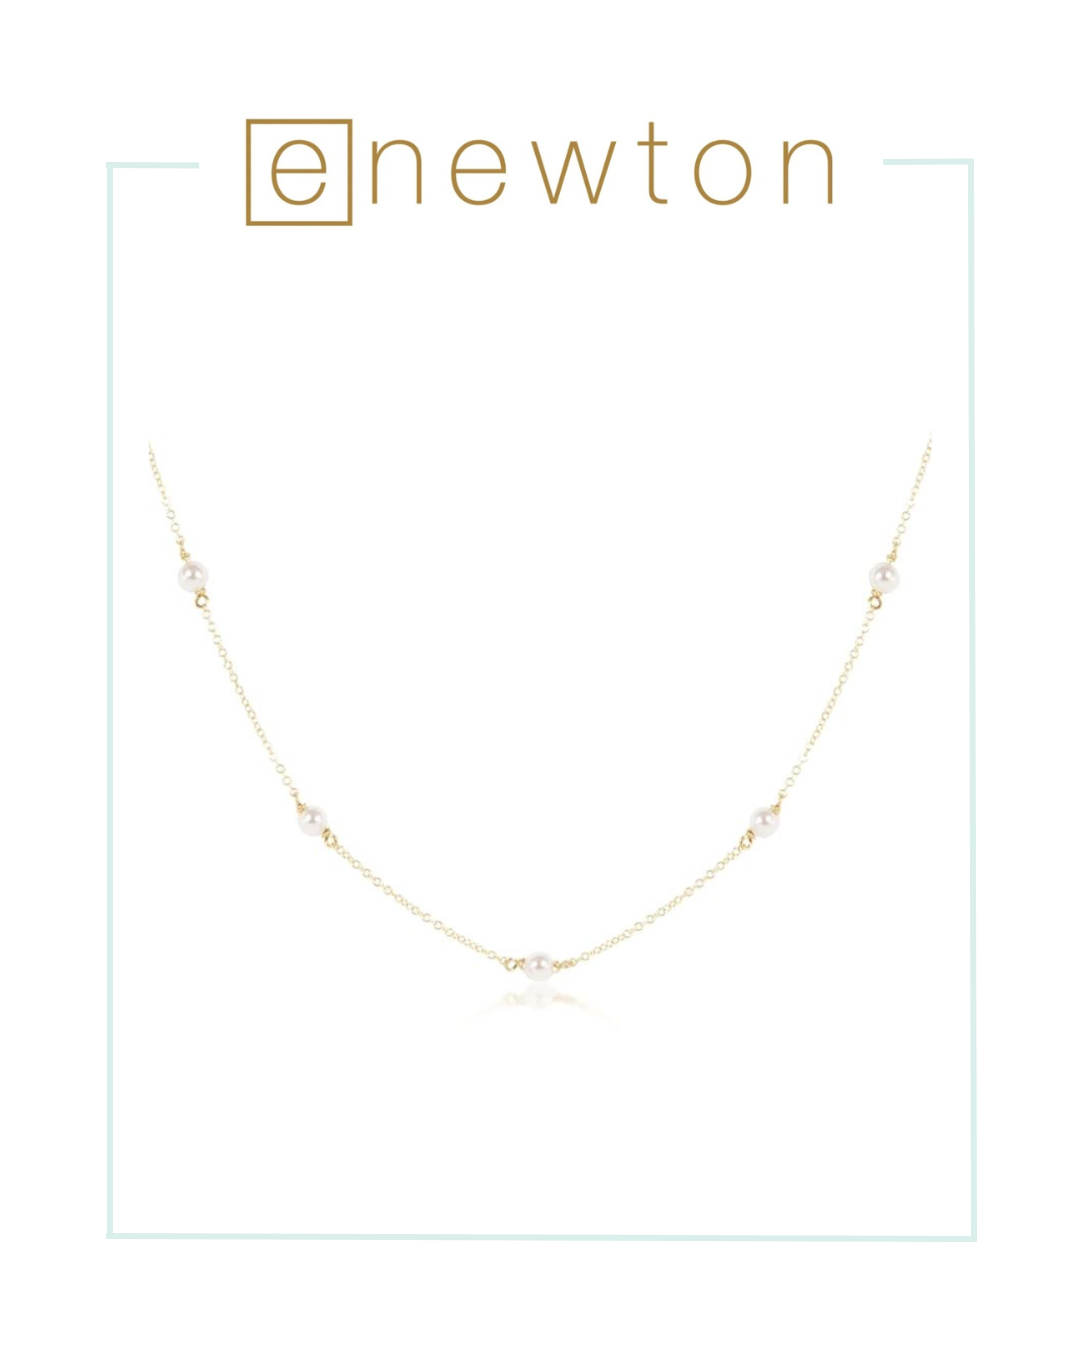 E Newton 17" Choker Simplicity Chain Gold - 4mm Pearl-Bracelets-ENEWTON-The Village Shoppe, Women’s Fashion Boutique, Shop Online and In Store - Located in Muscle Shoals, AL.